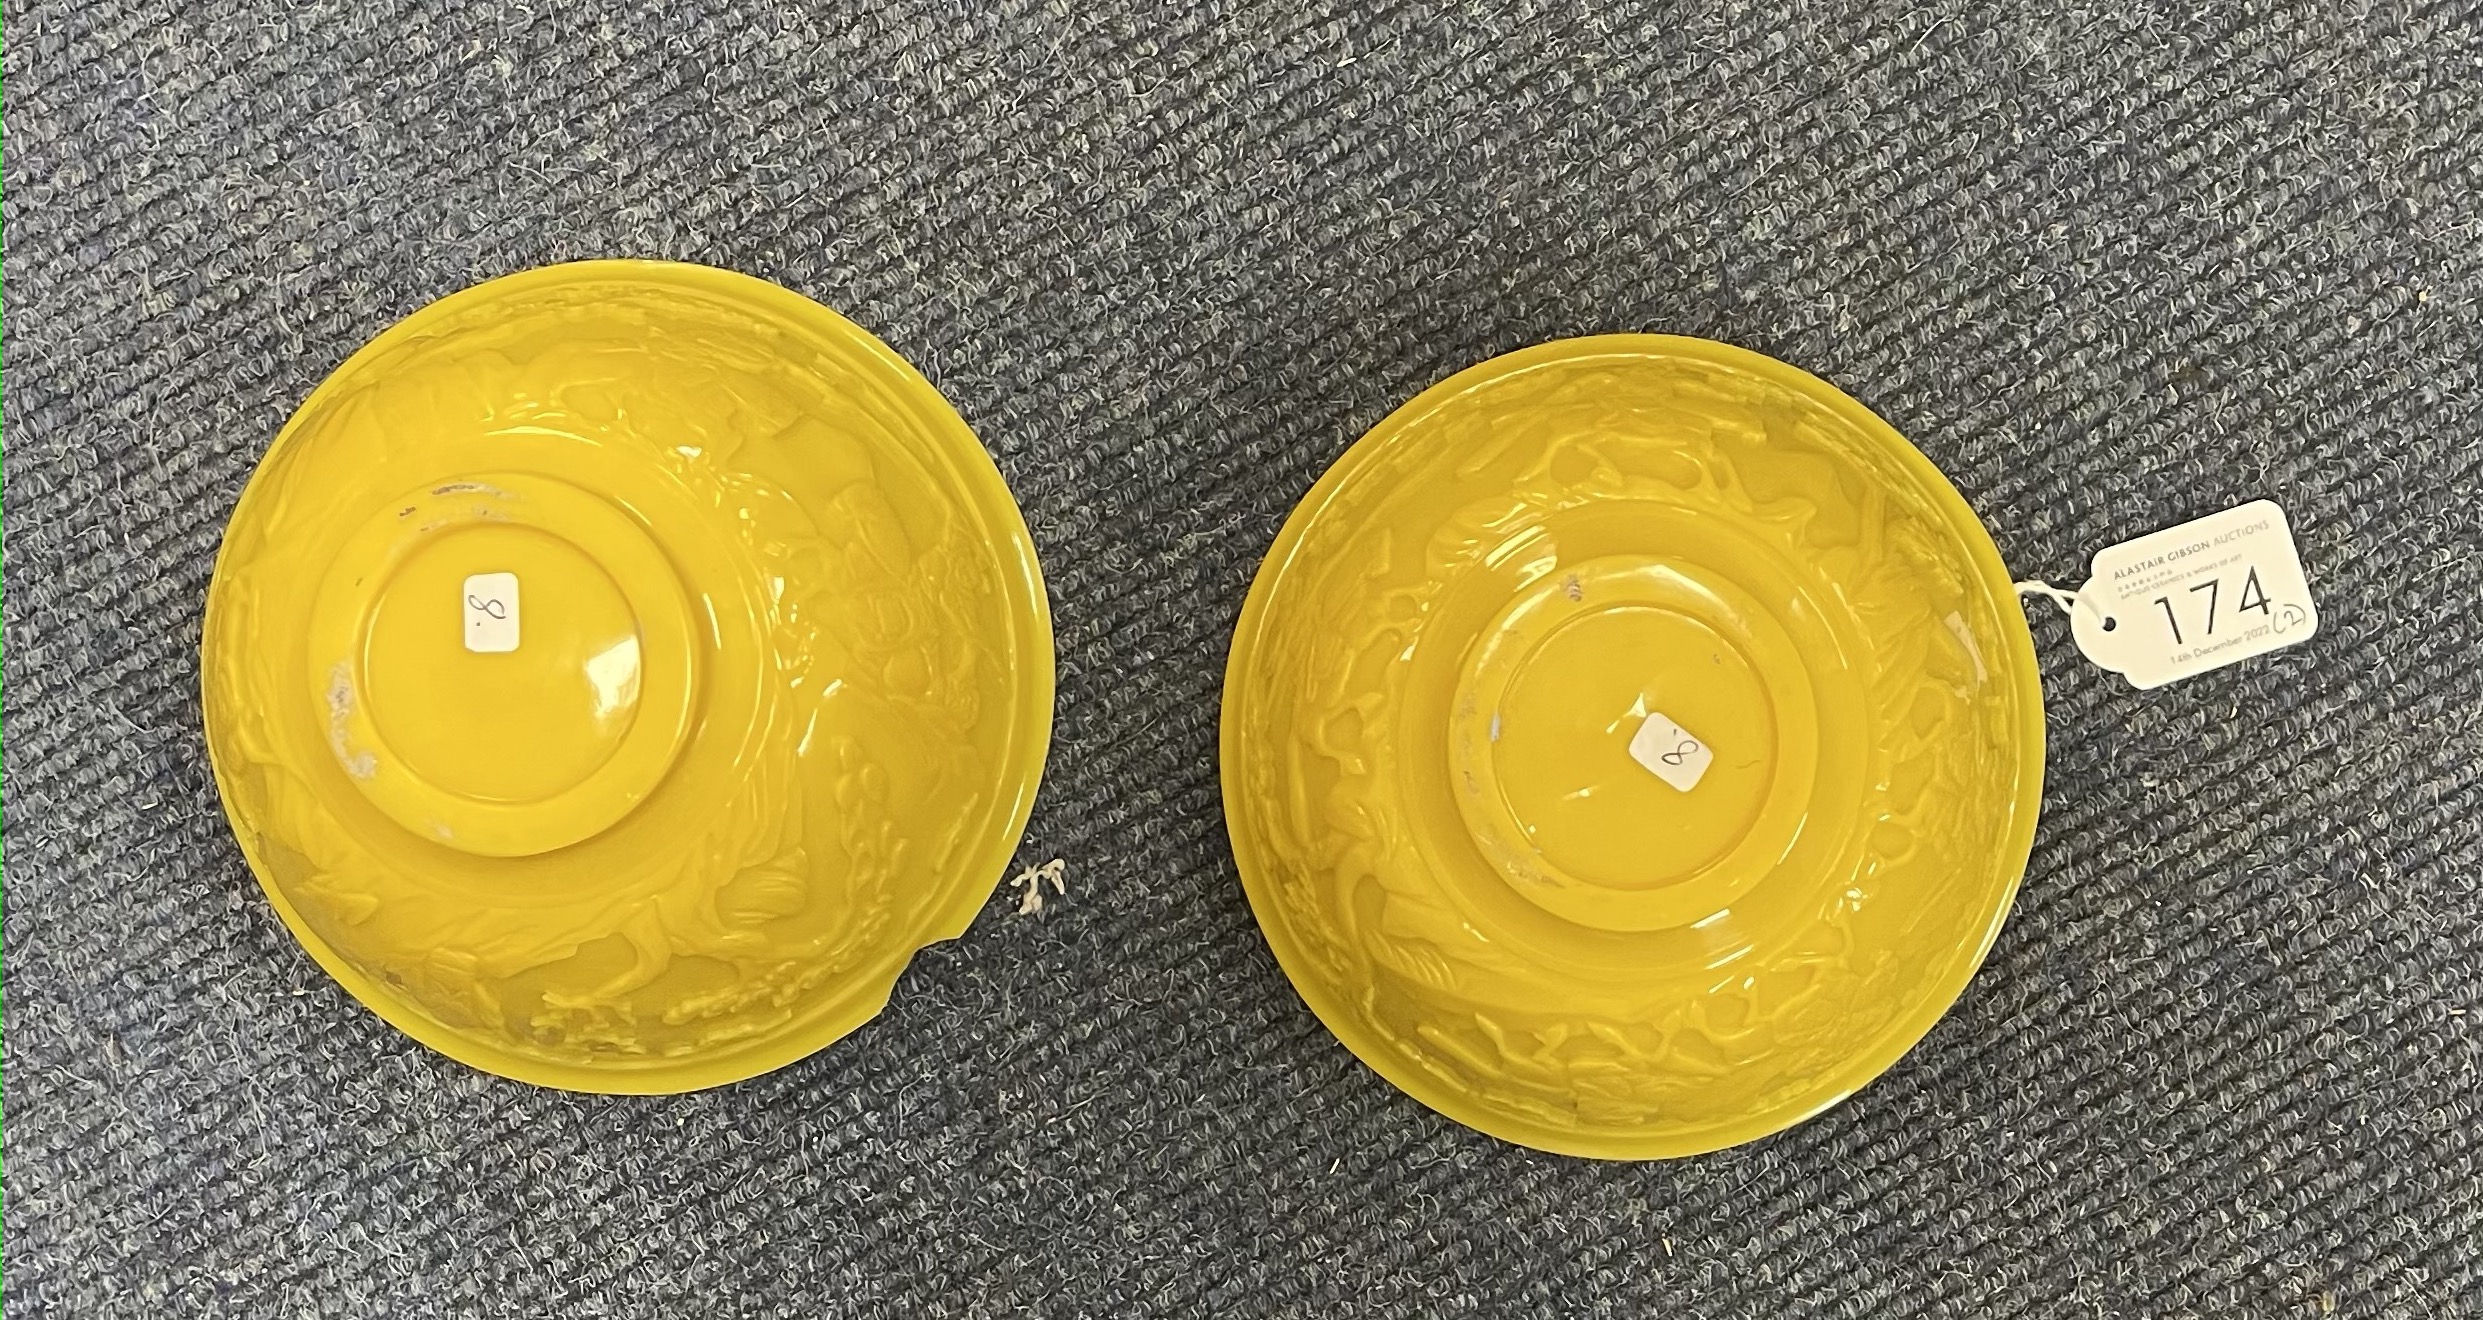 A PAIR OF CHINESE ‘IMPERIAL’ YELLOW GLASS BOWLS, QING DYNASTY, 19TH CENTURY - Image 3 of 10